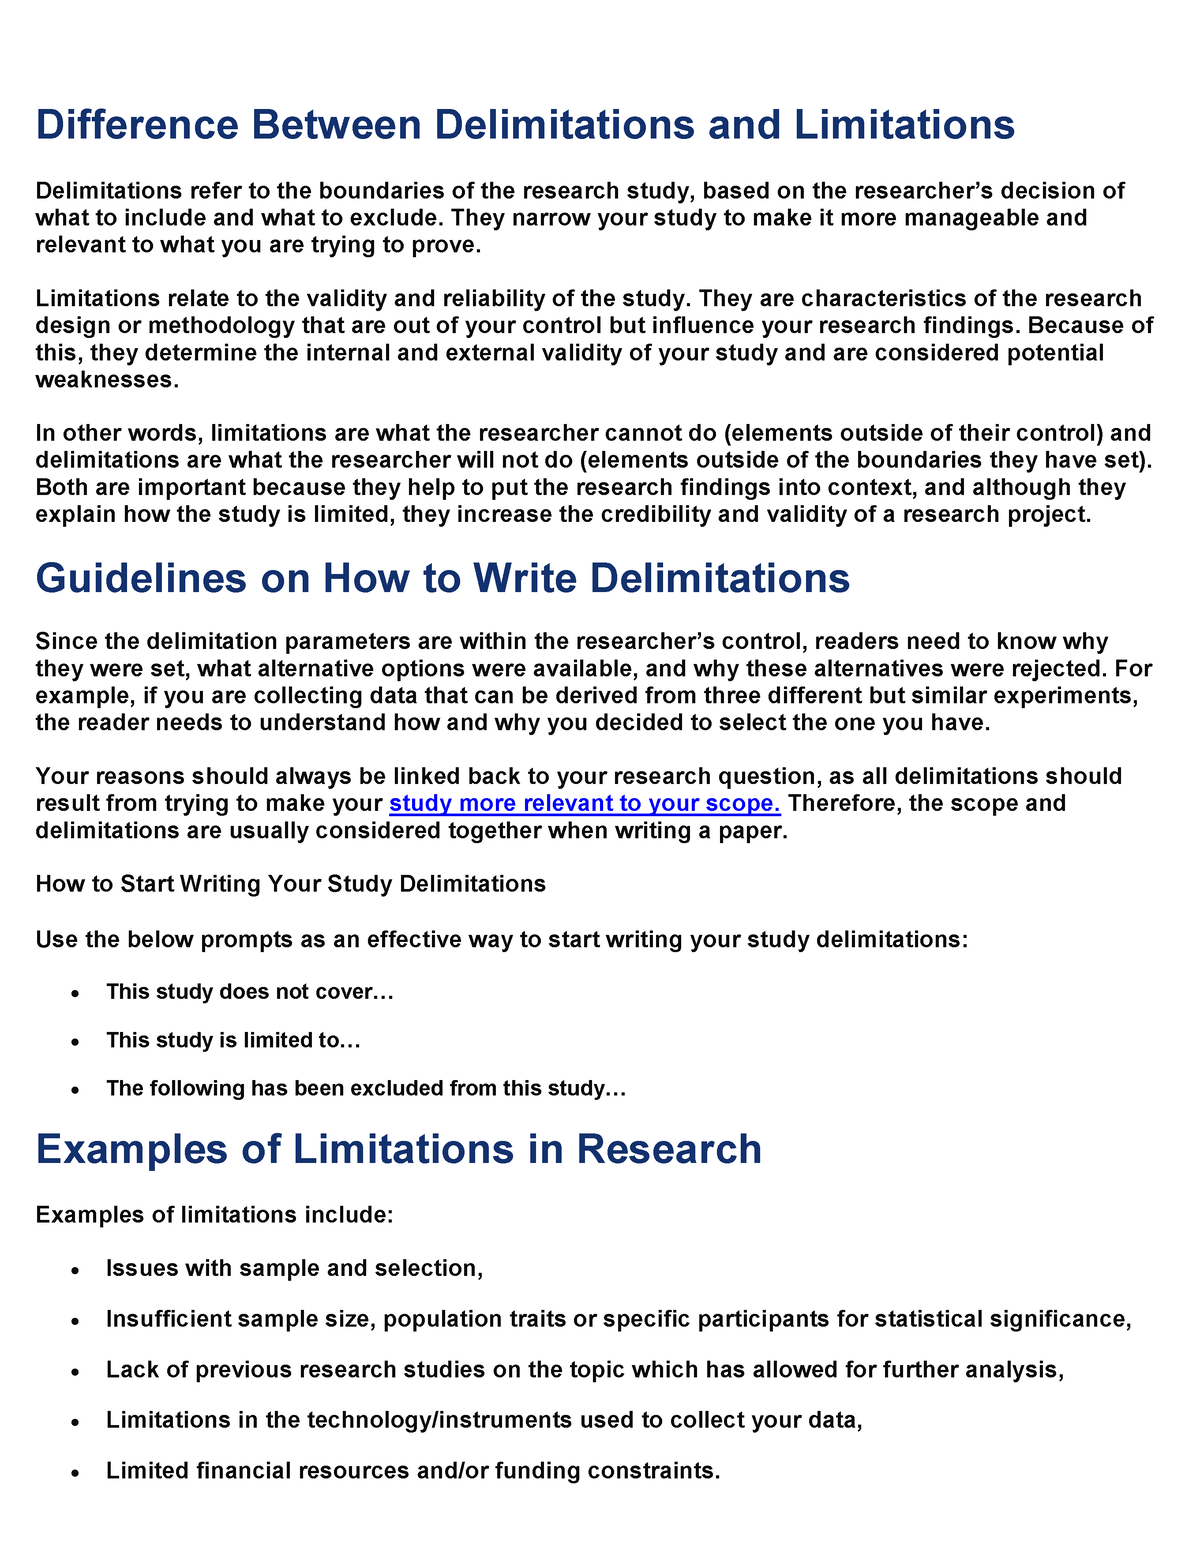 limitations and delimitations in a research